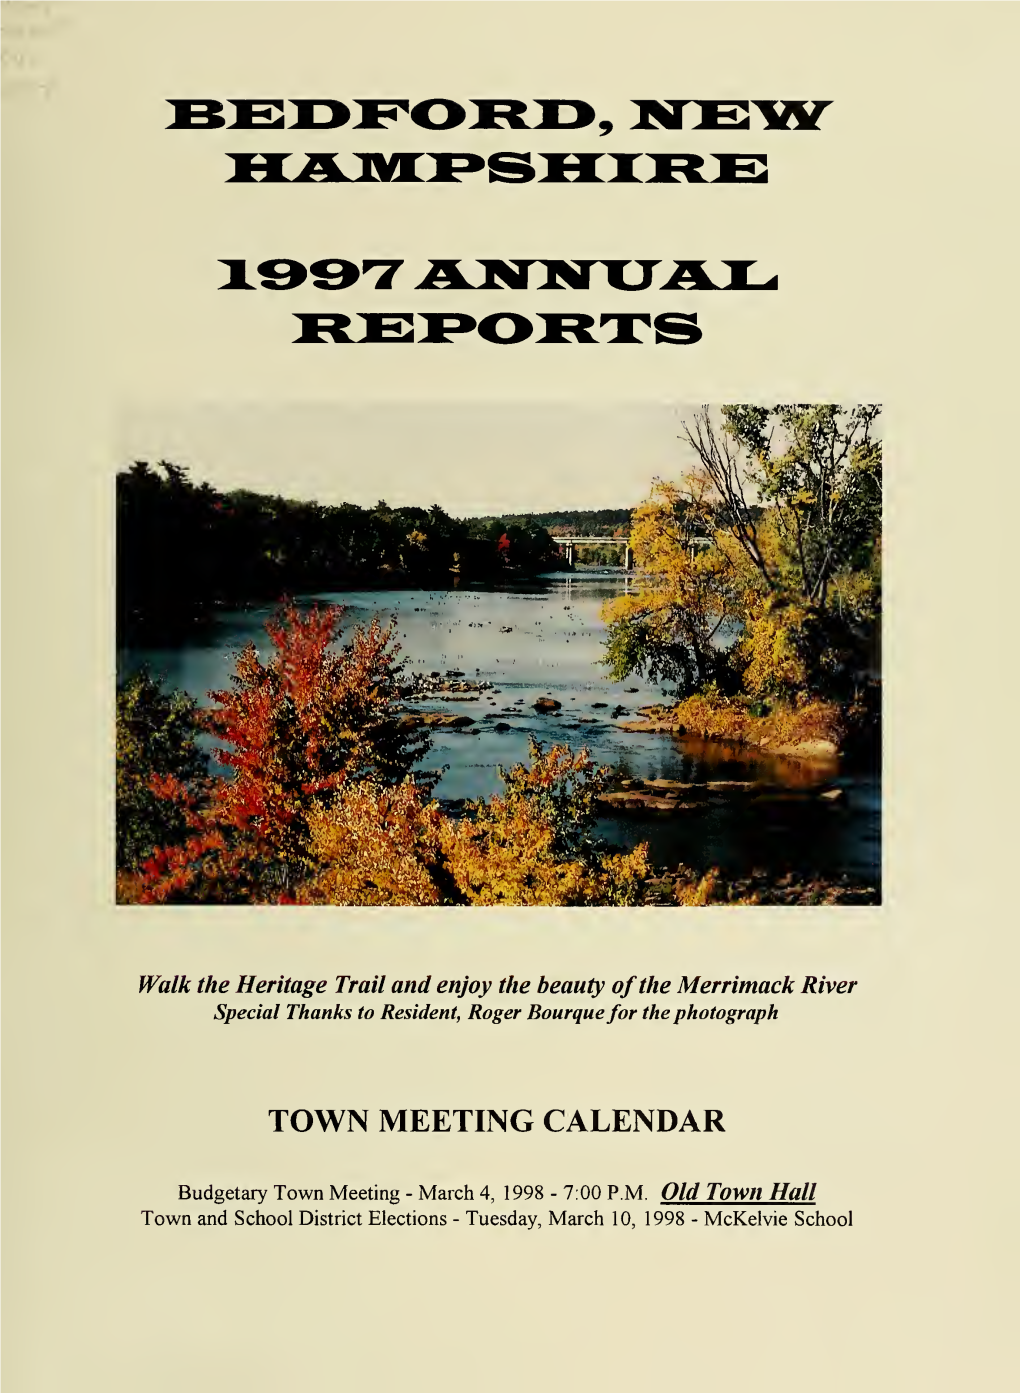 Annual Report for the Town of Bedford, New Hampshire, for the Year